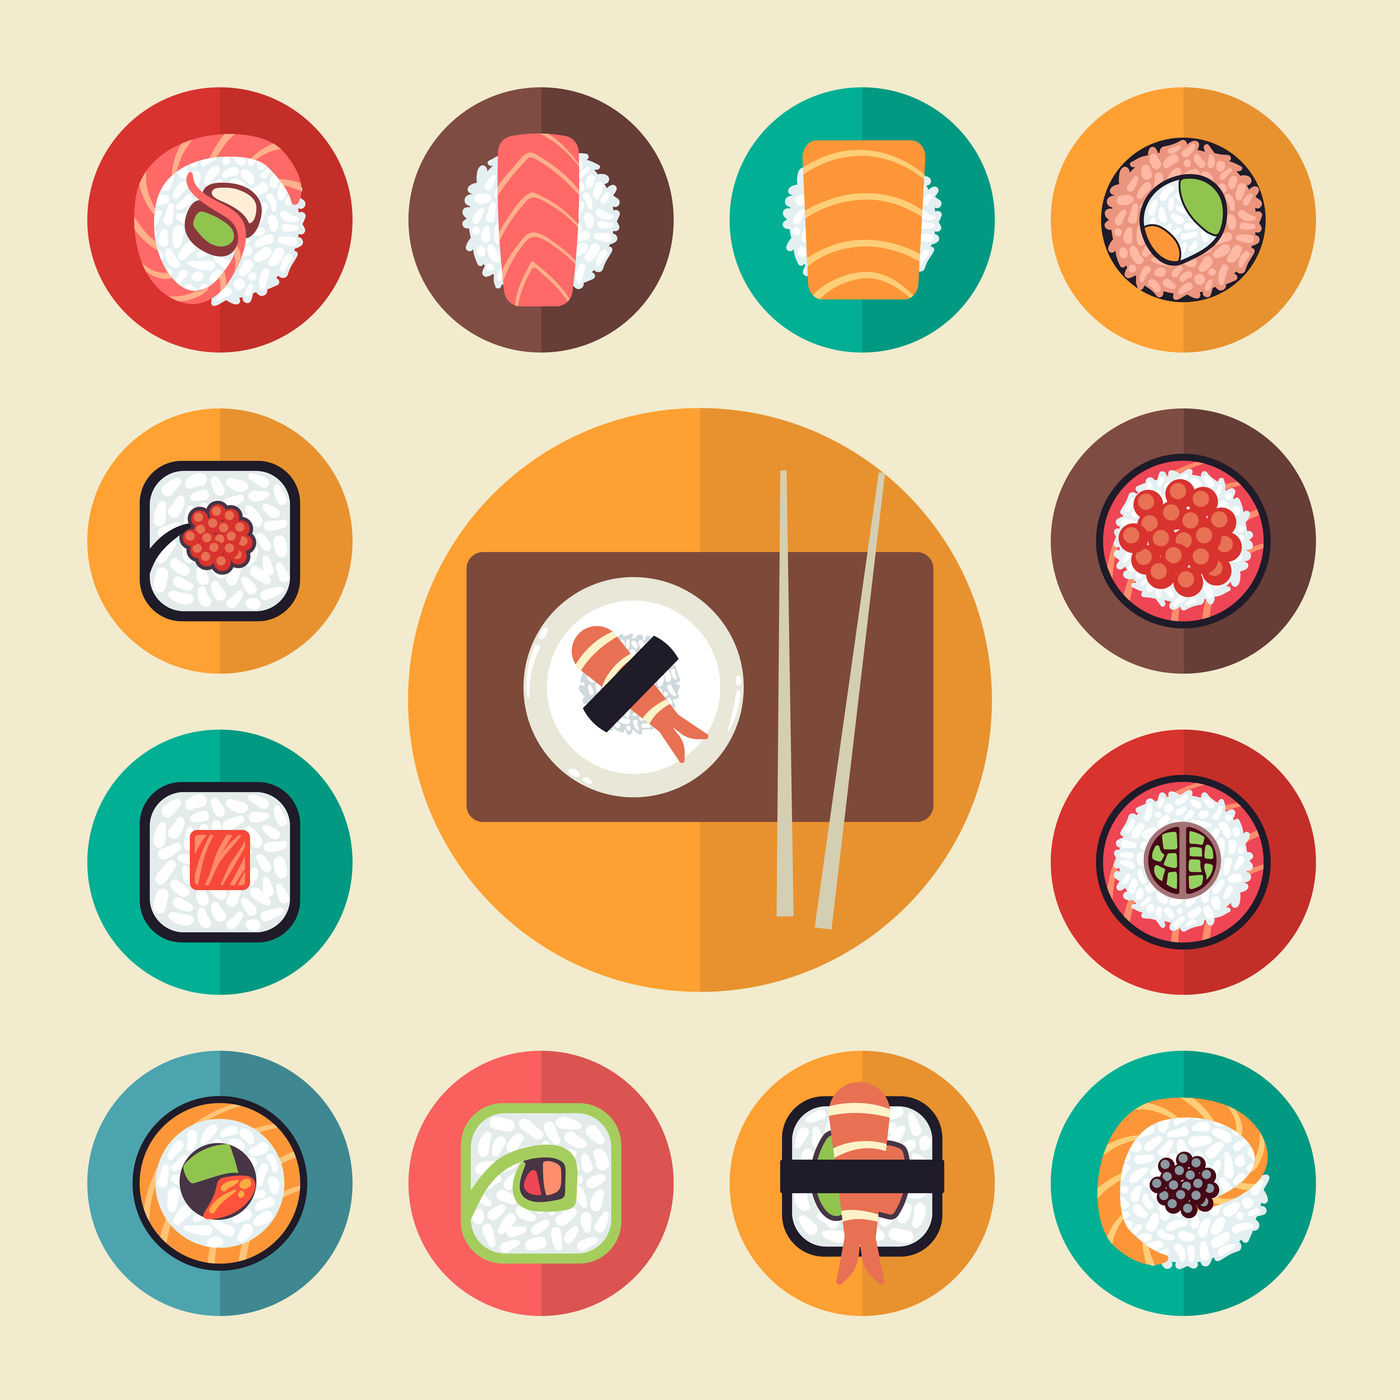 Japanese food sushi icons vector illustration set By Microvector ...